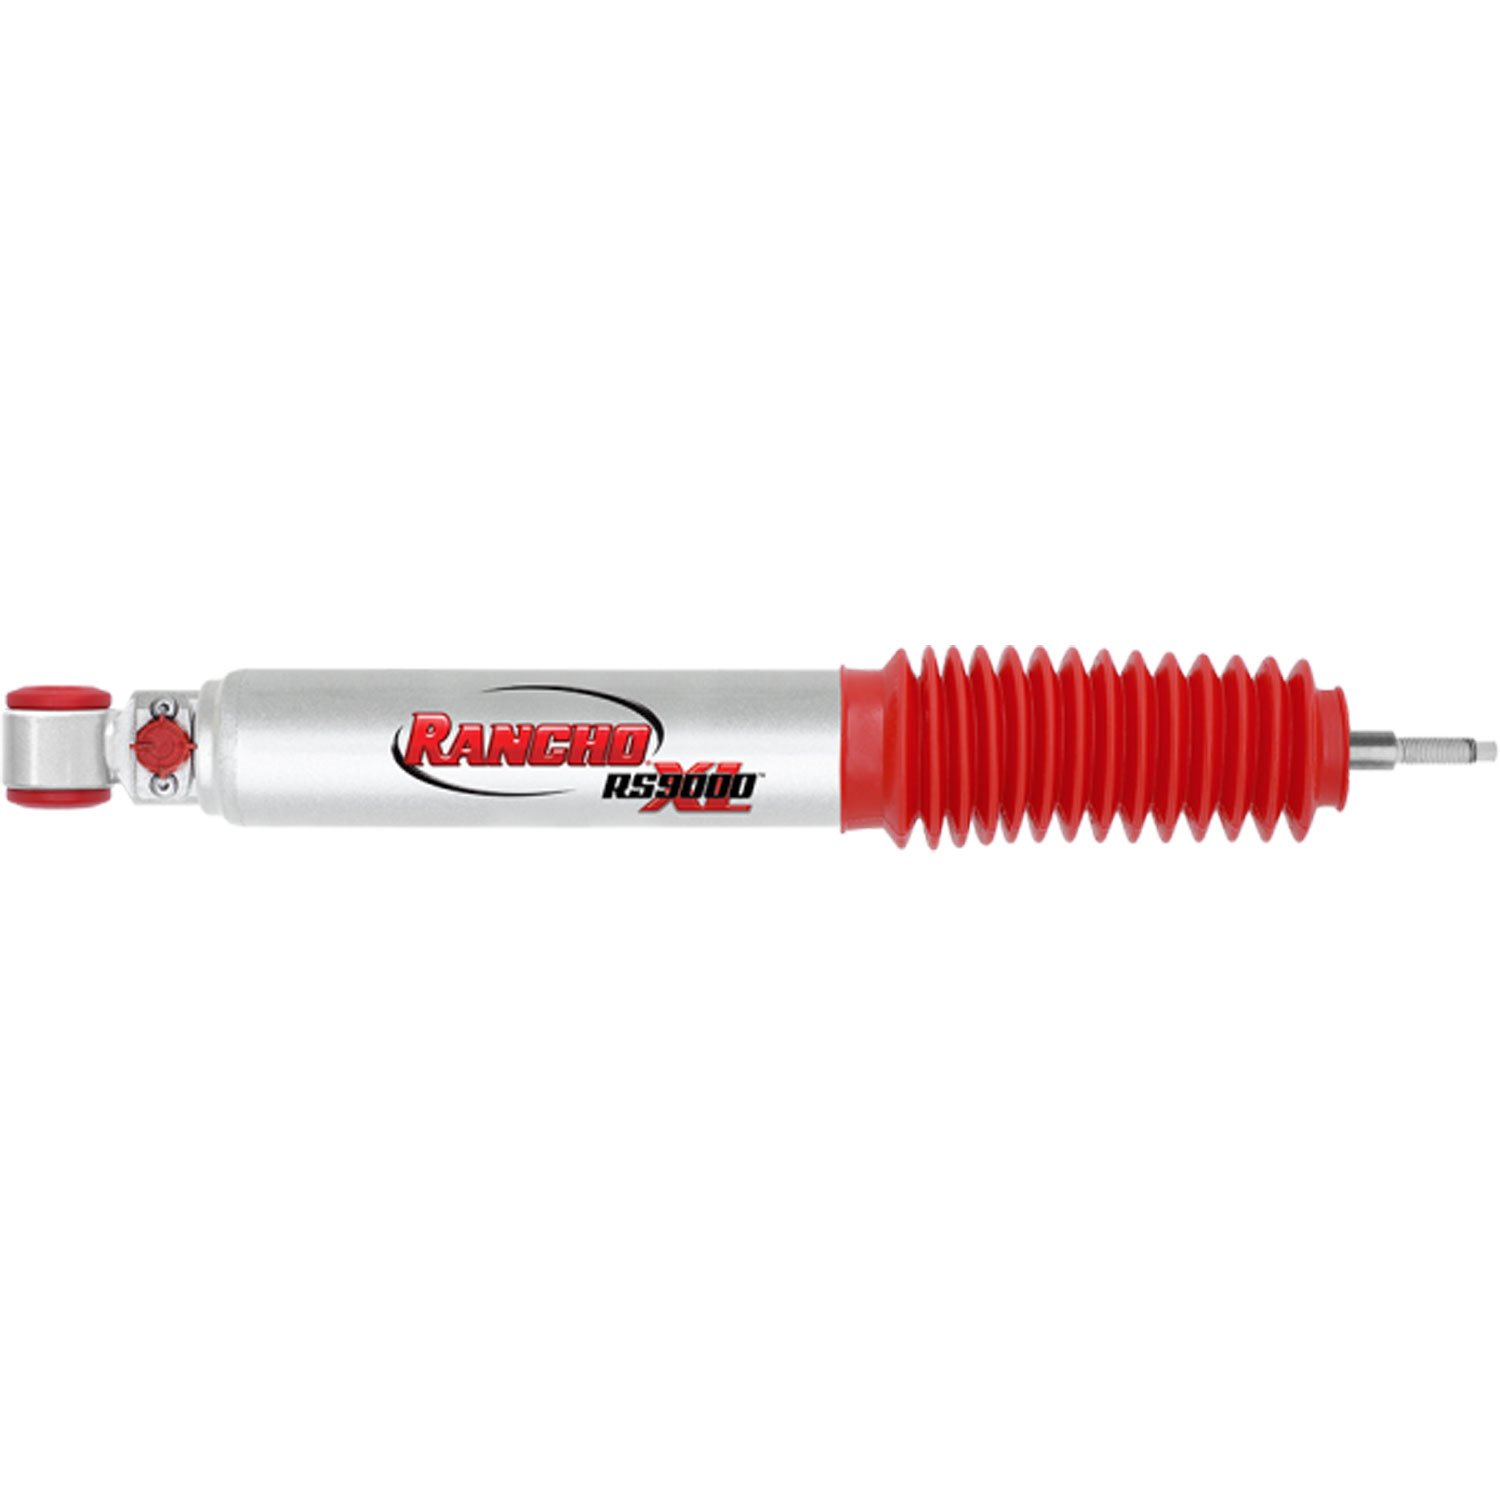 RS9000XL Front Shock Absorber Fits Ford Bronco, Ranger, E-Series Van and F-Series Pickup